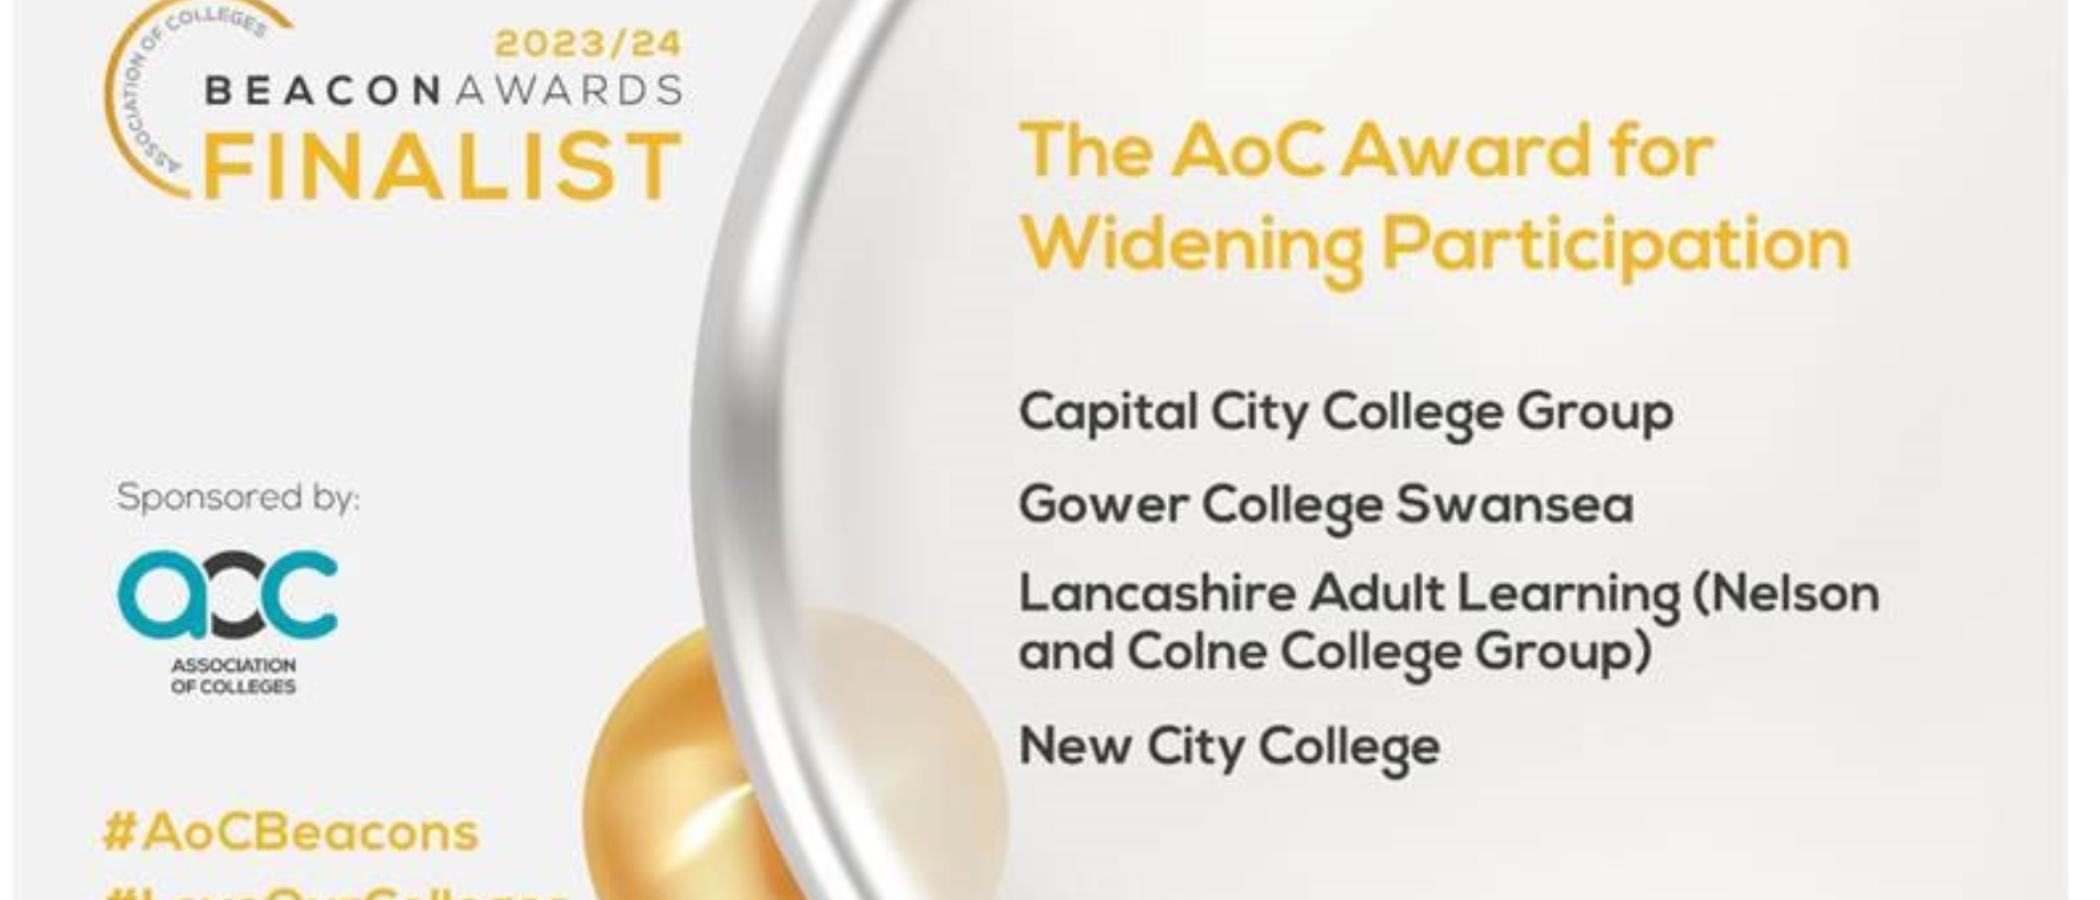 A graphical image issued by the Association of Colleges, announcing Gower College Swansea as a finalist in the Widening Participation award category.